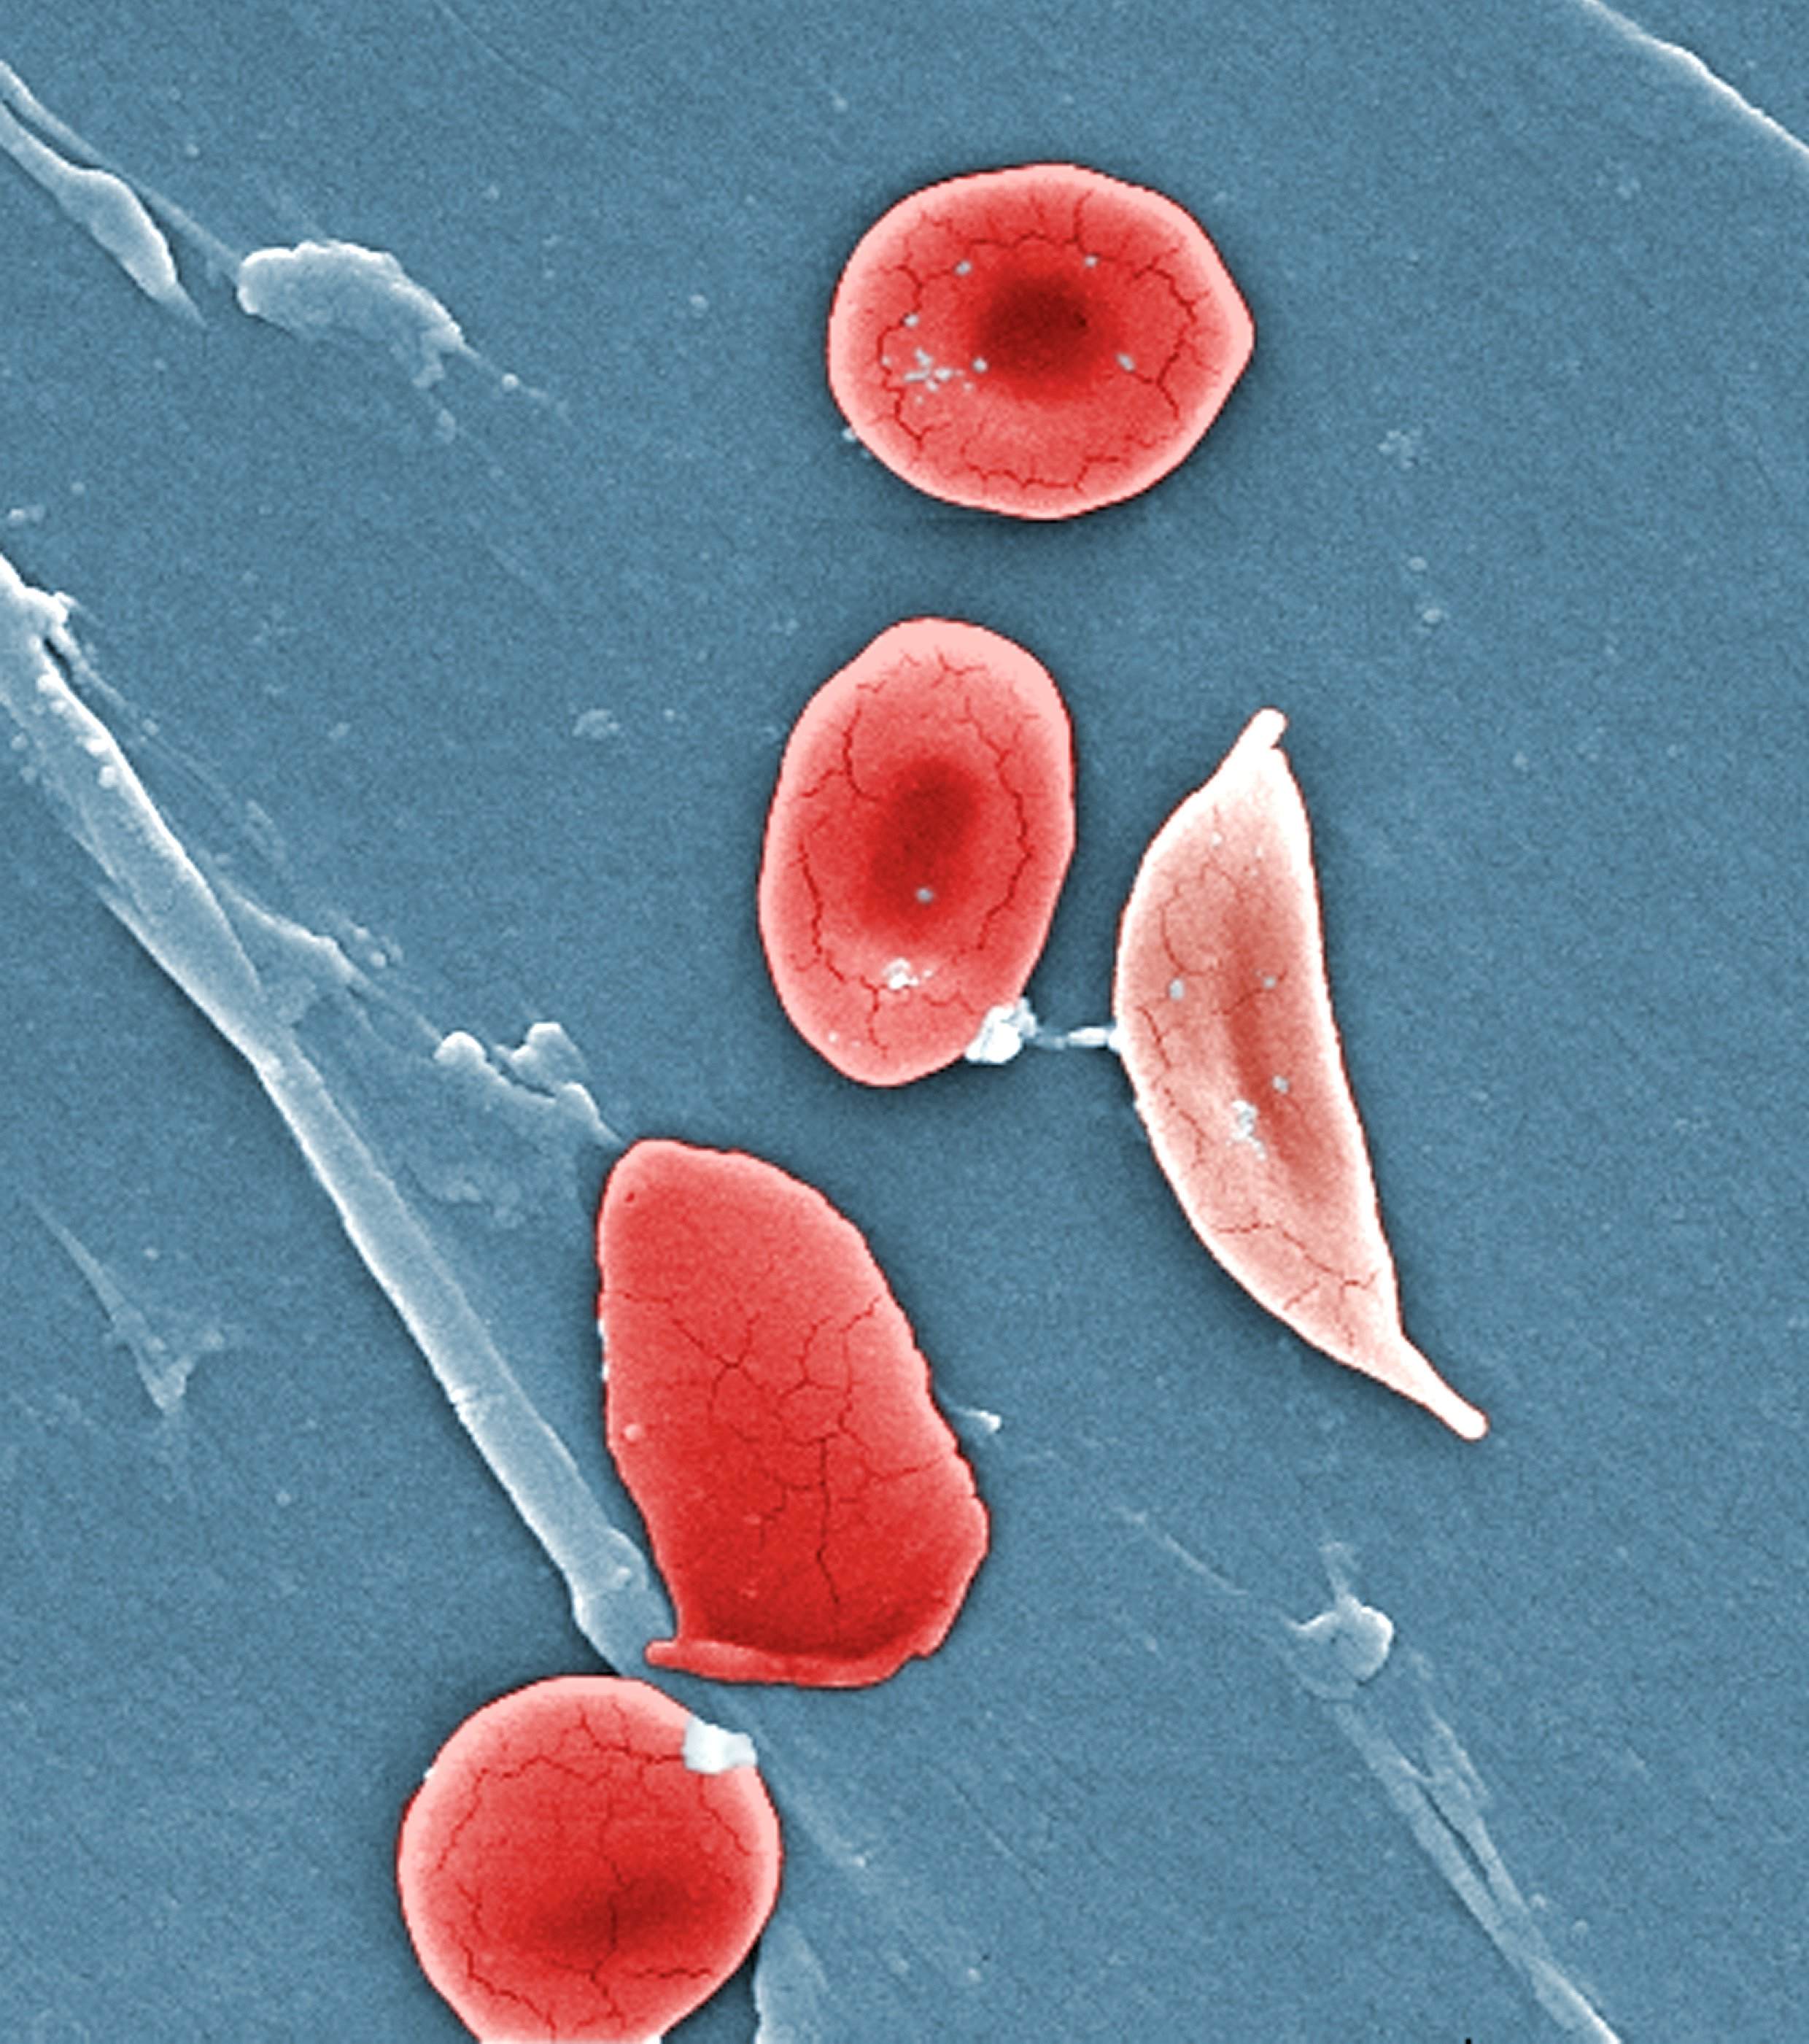 comparative-ultrastructural-morphology-between-normal-red-blood-cells-rbcs-and-a-sickle-cell-rbc.jpg